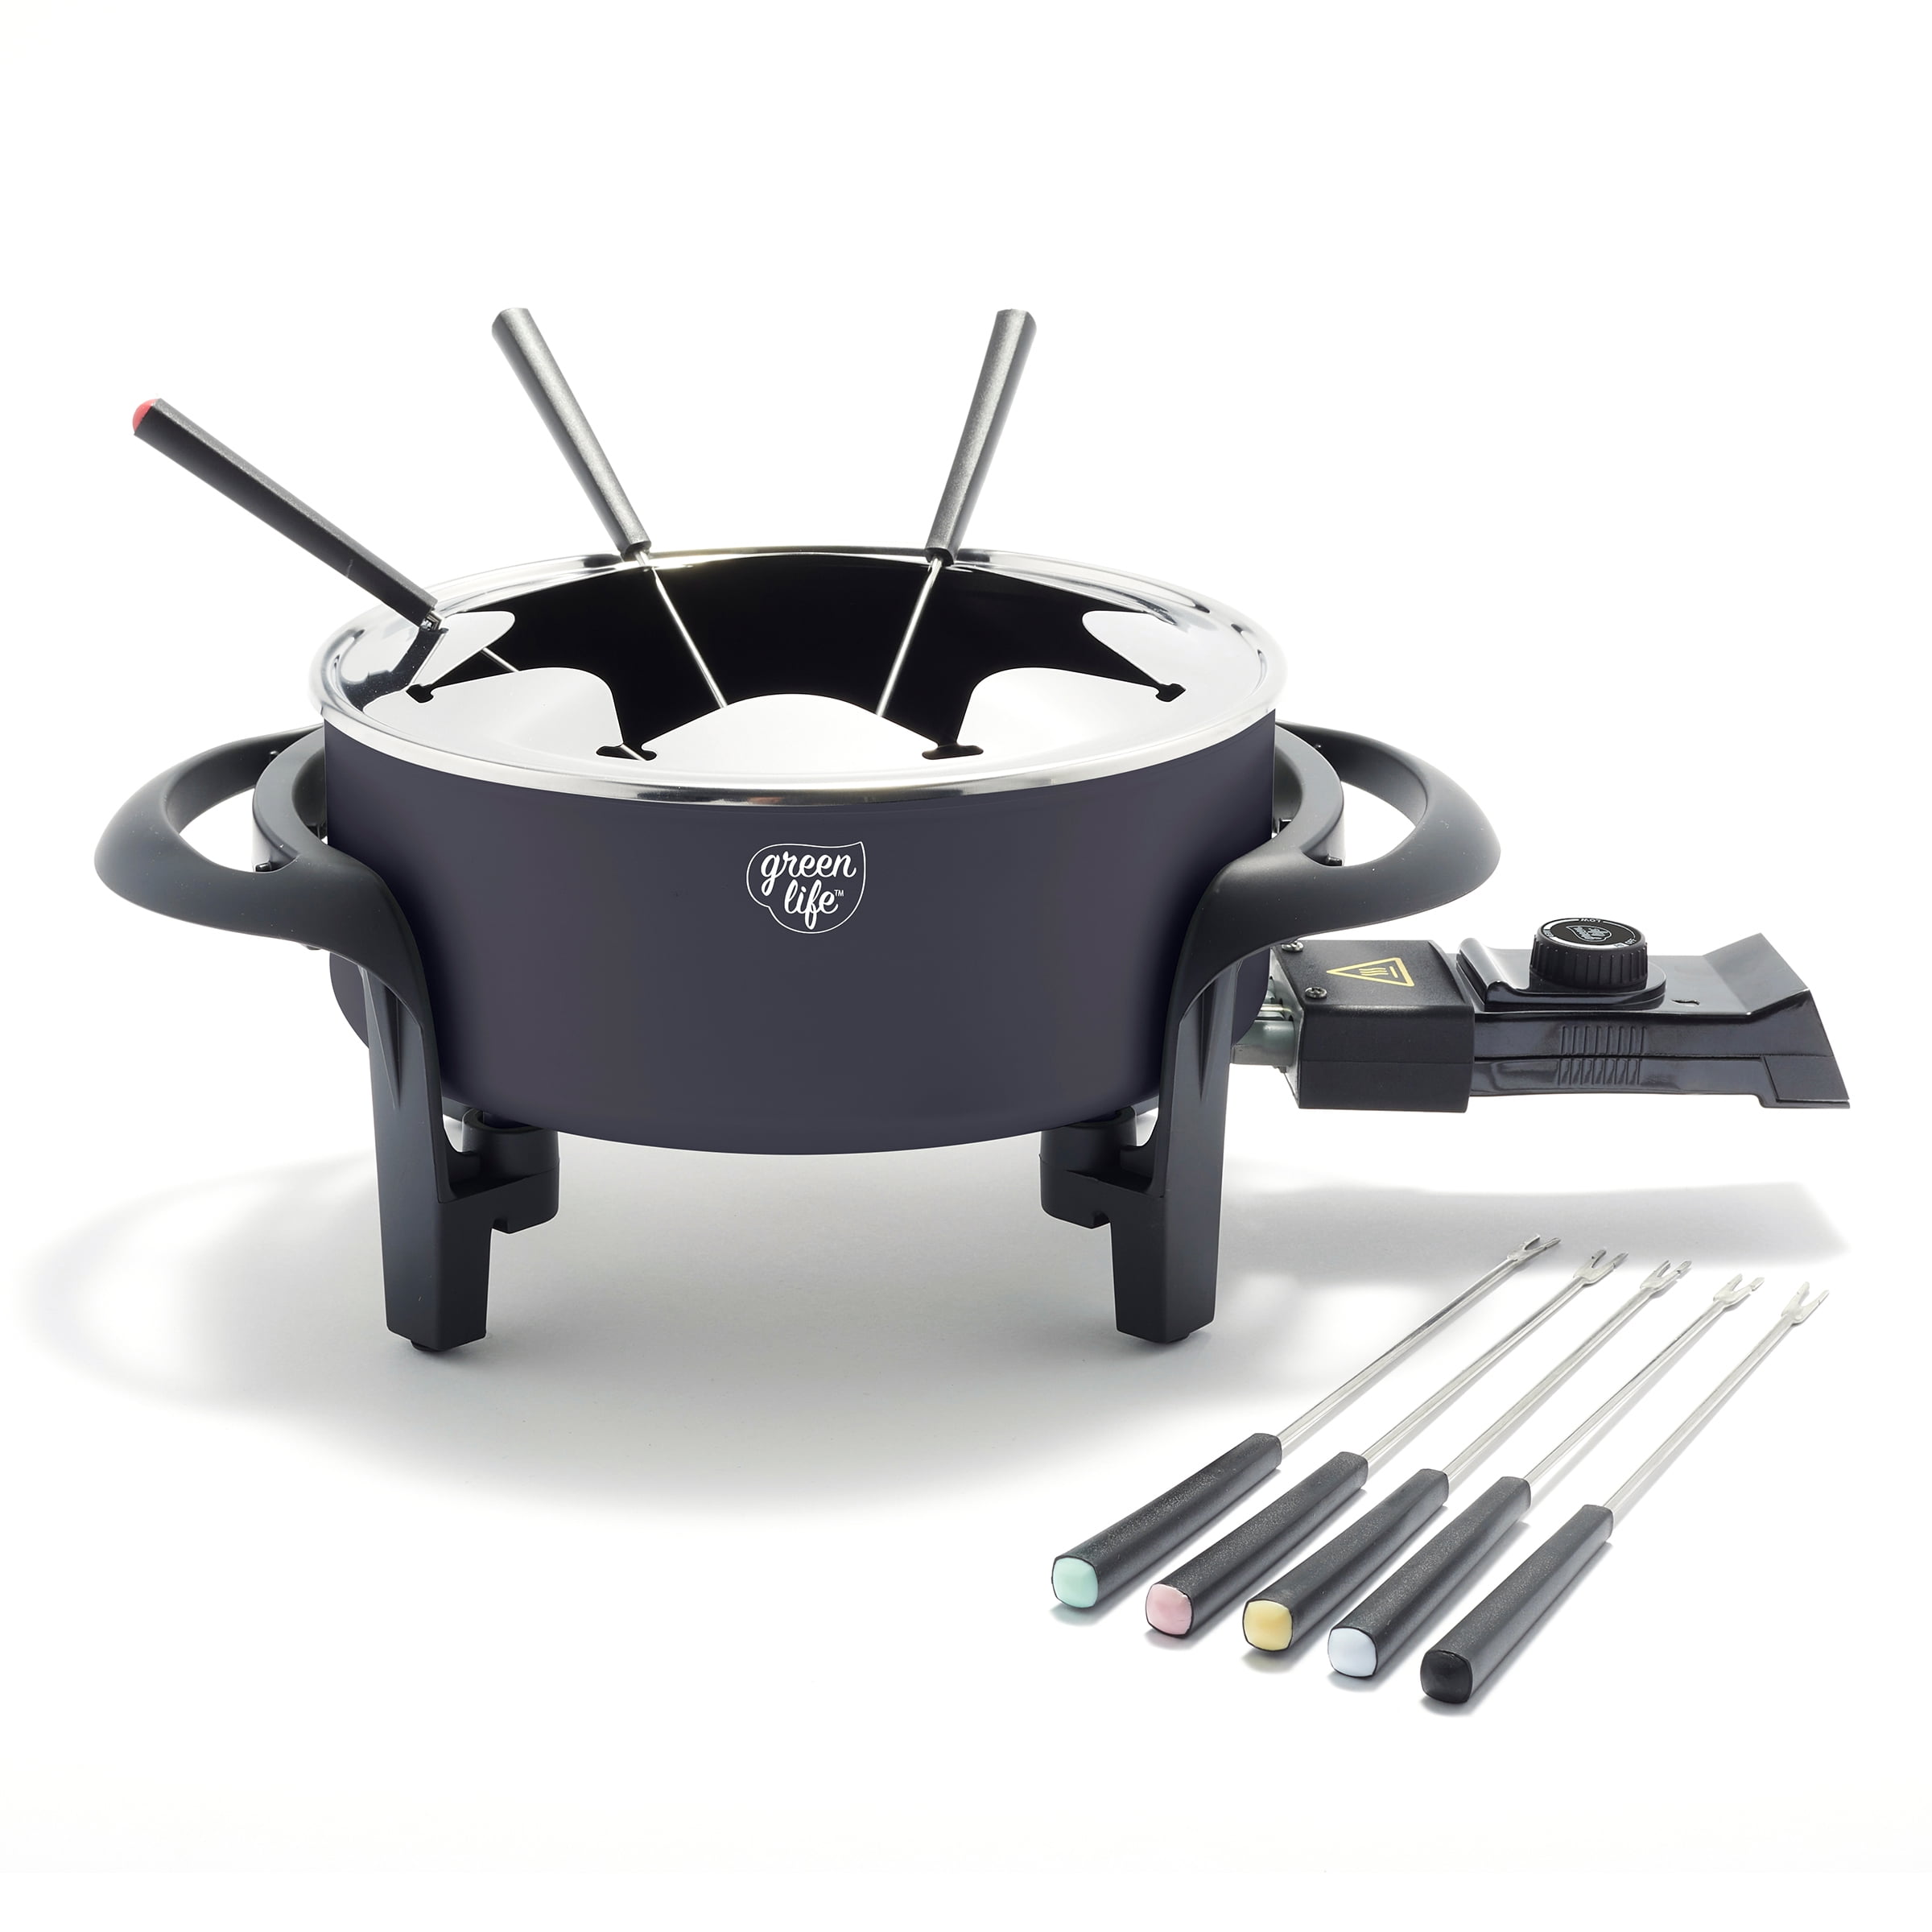 TEFAL ELECTRIC NON-STICK SUPER FONDUE SET WITH 6 FORKS & RECIPES BOOK 